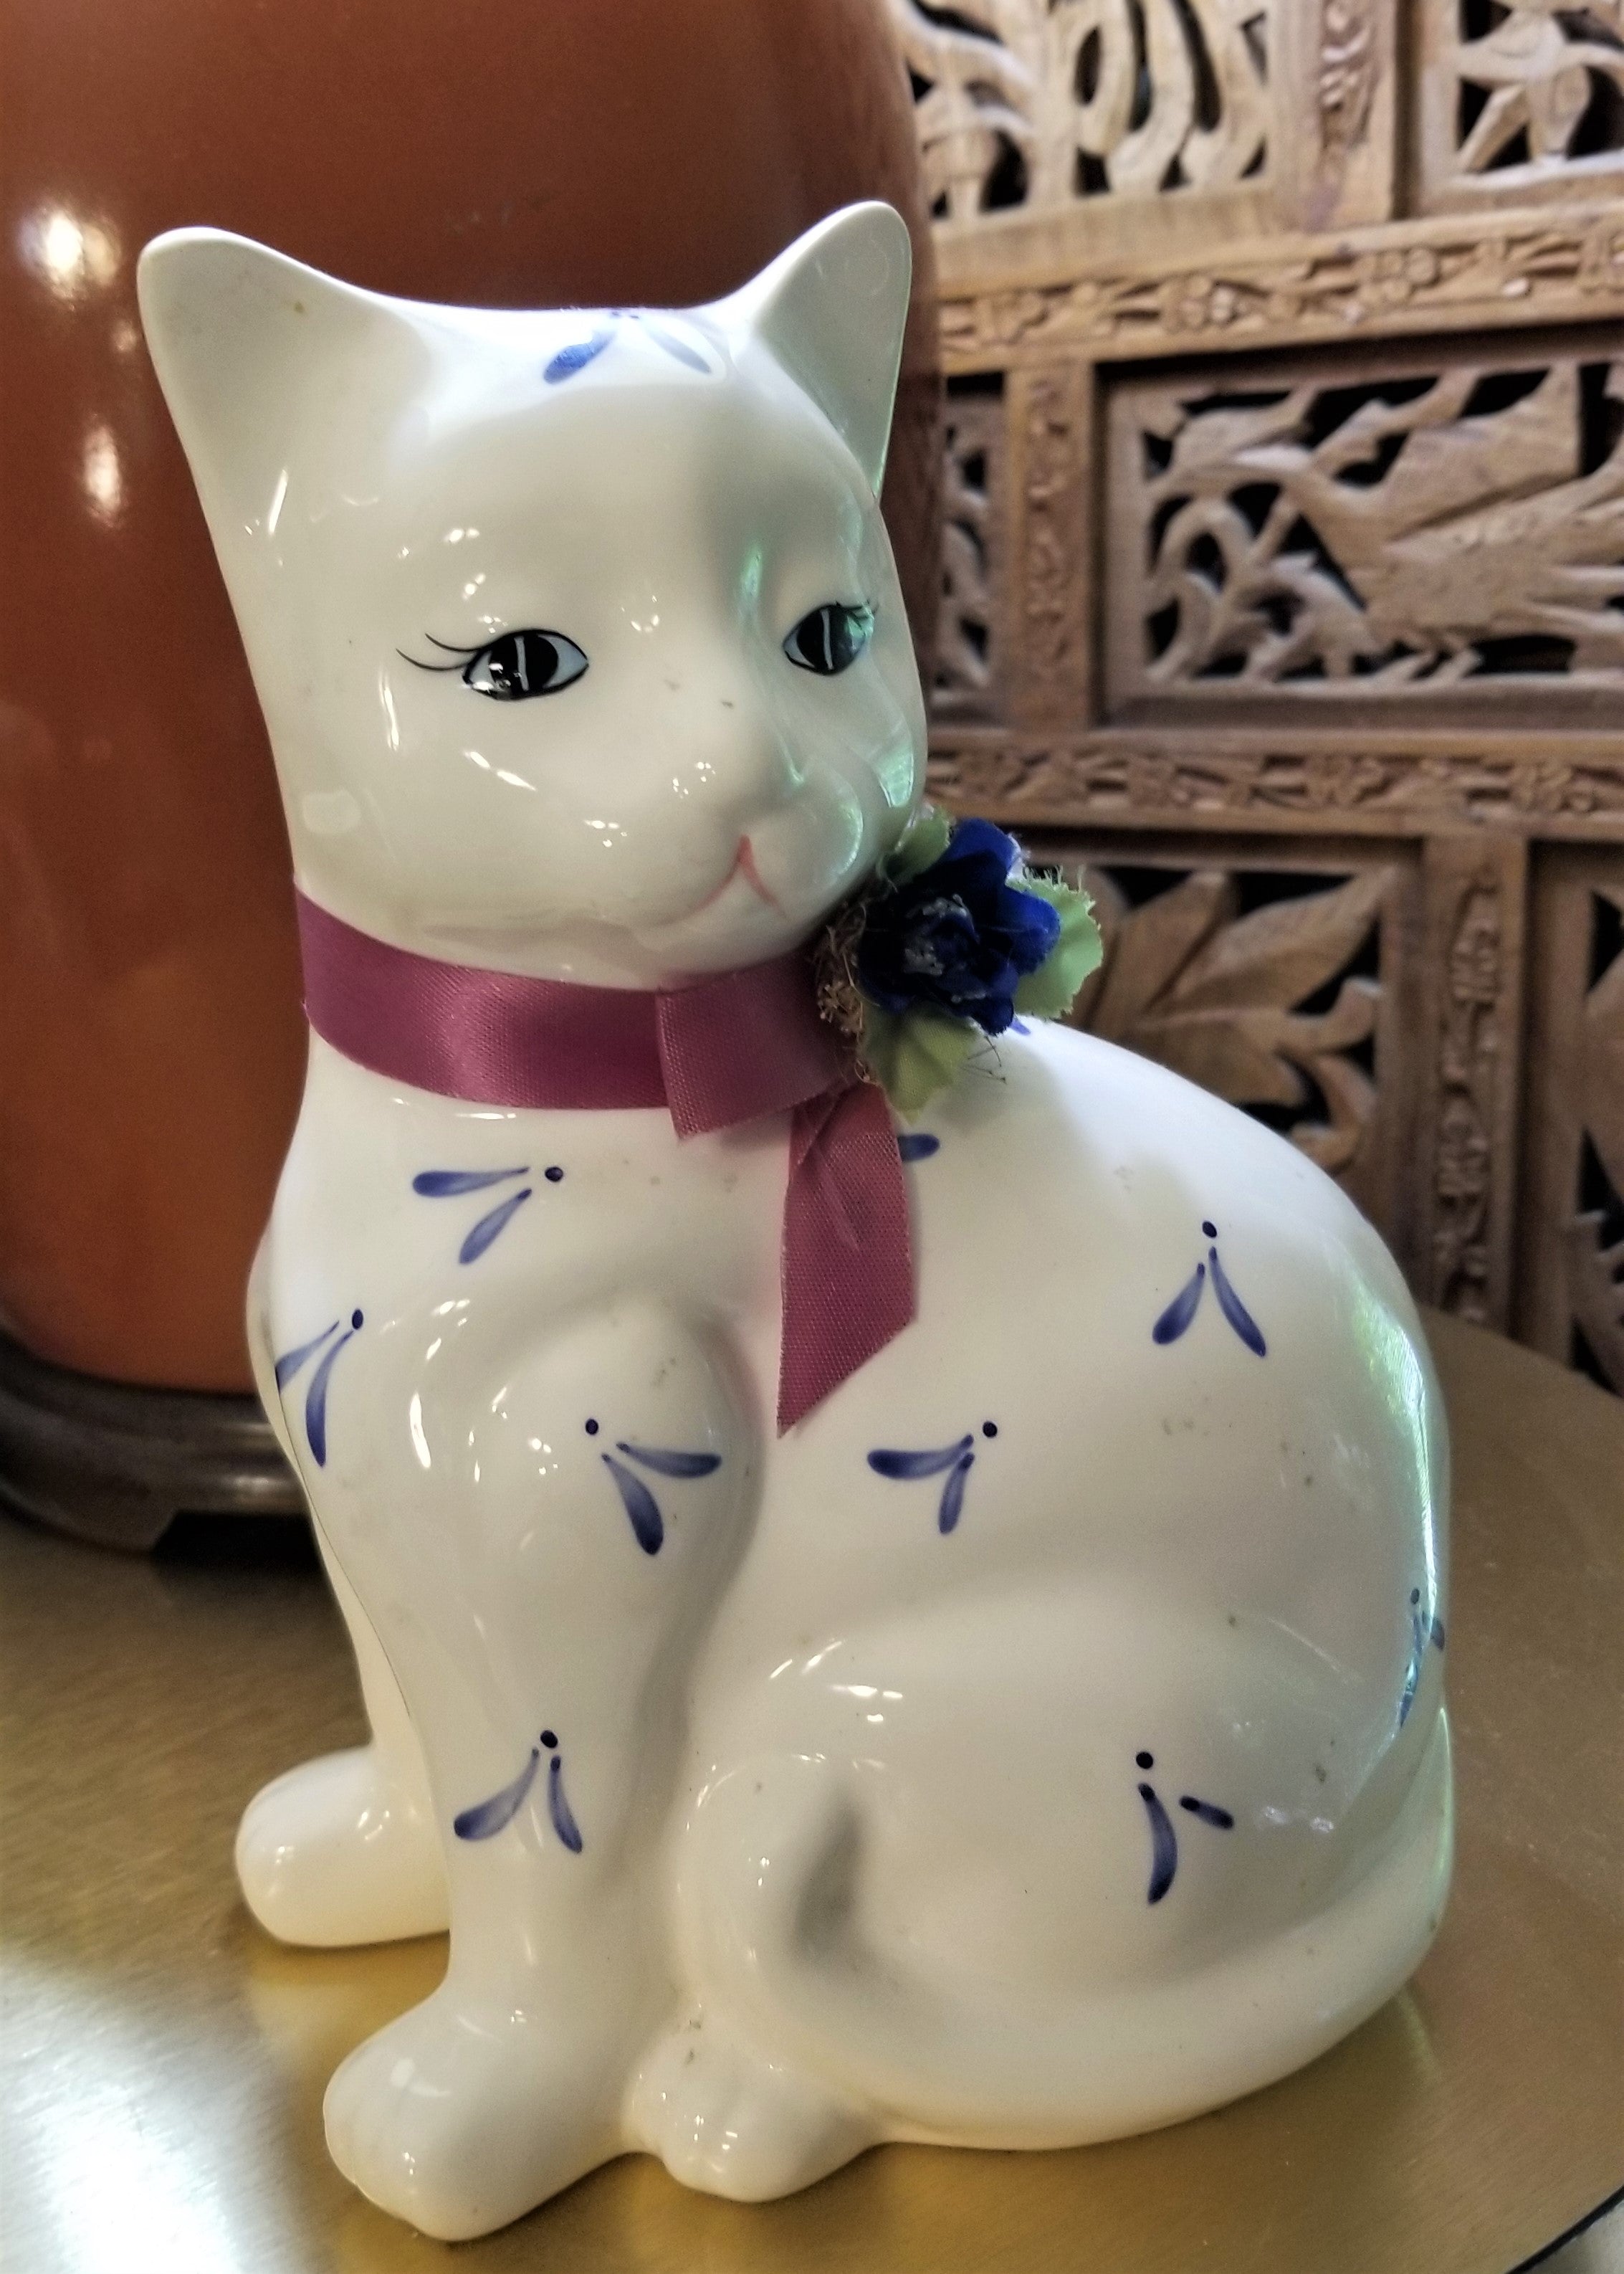 Vintage Tall White cat Figurine Hand-painted